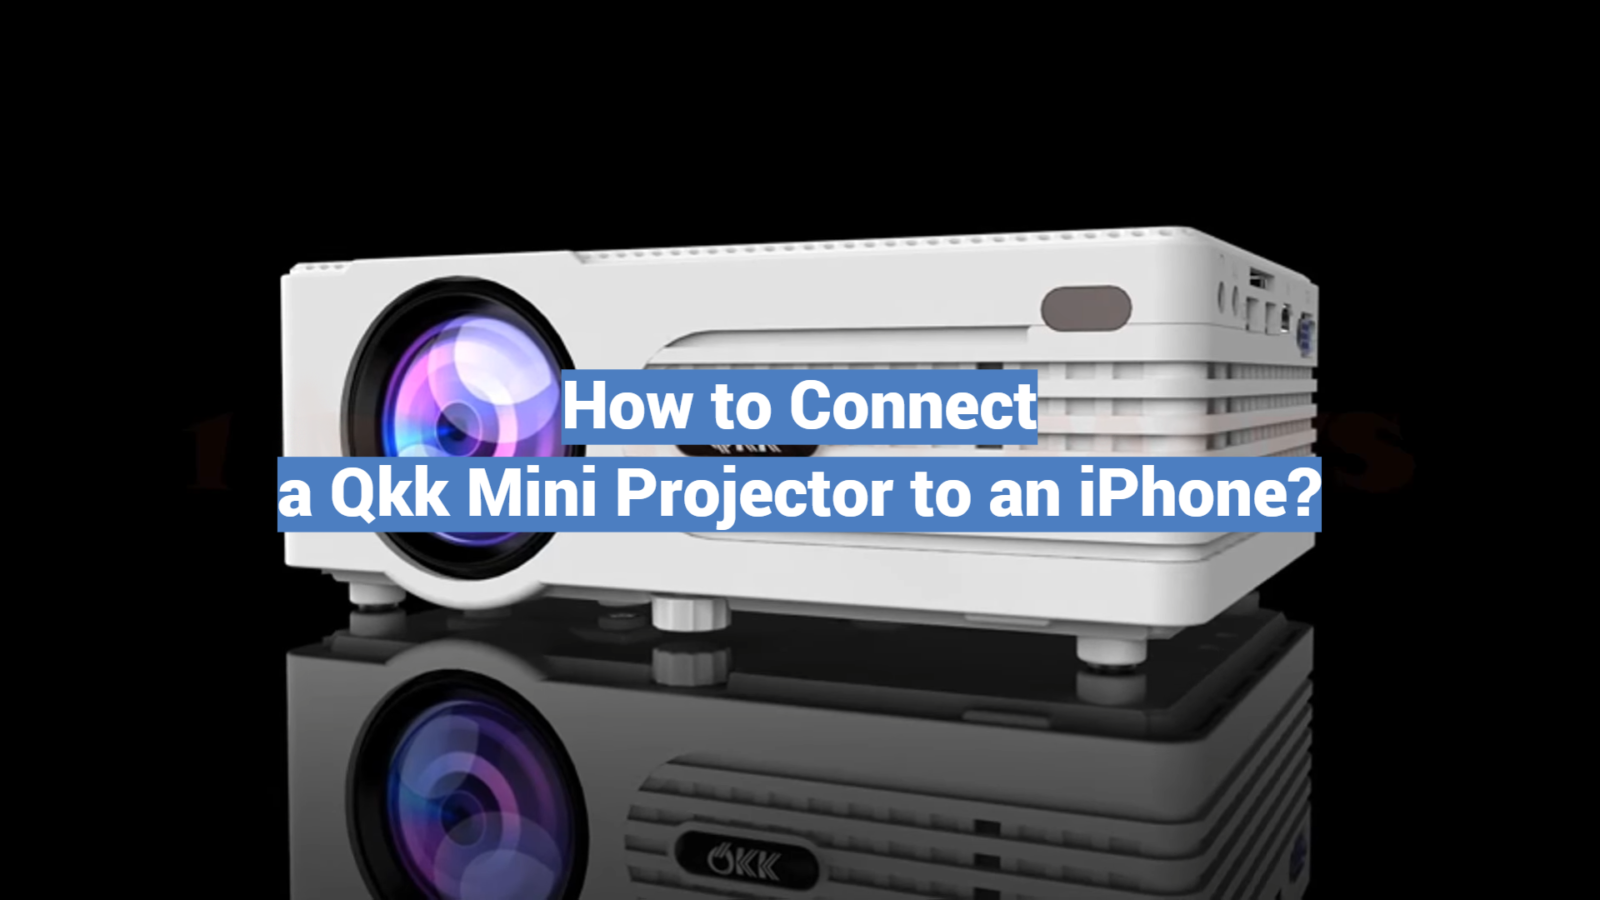 How to Connect a Qkk Mini Projector to an iPhone?